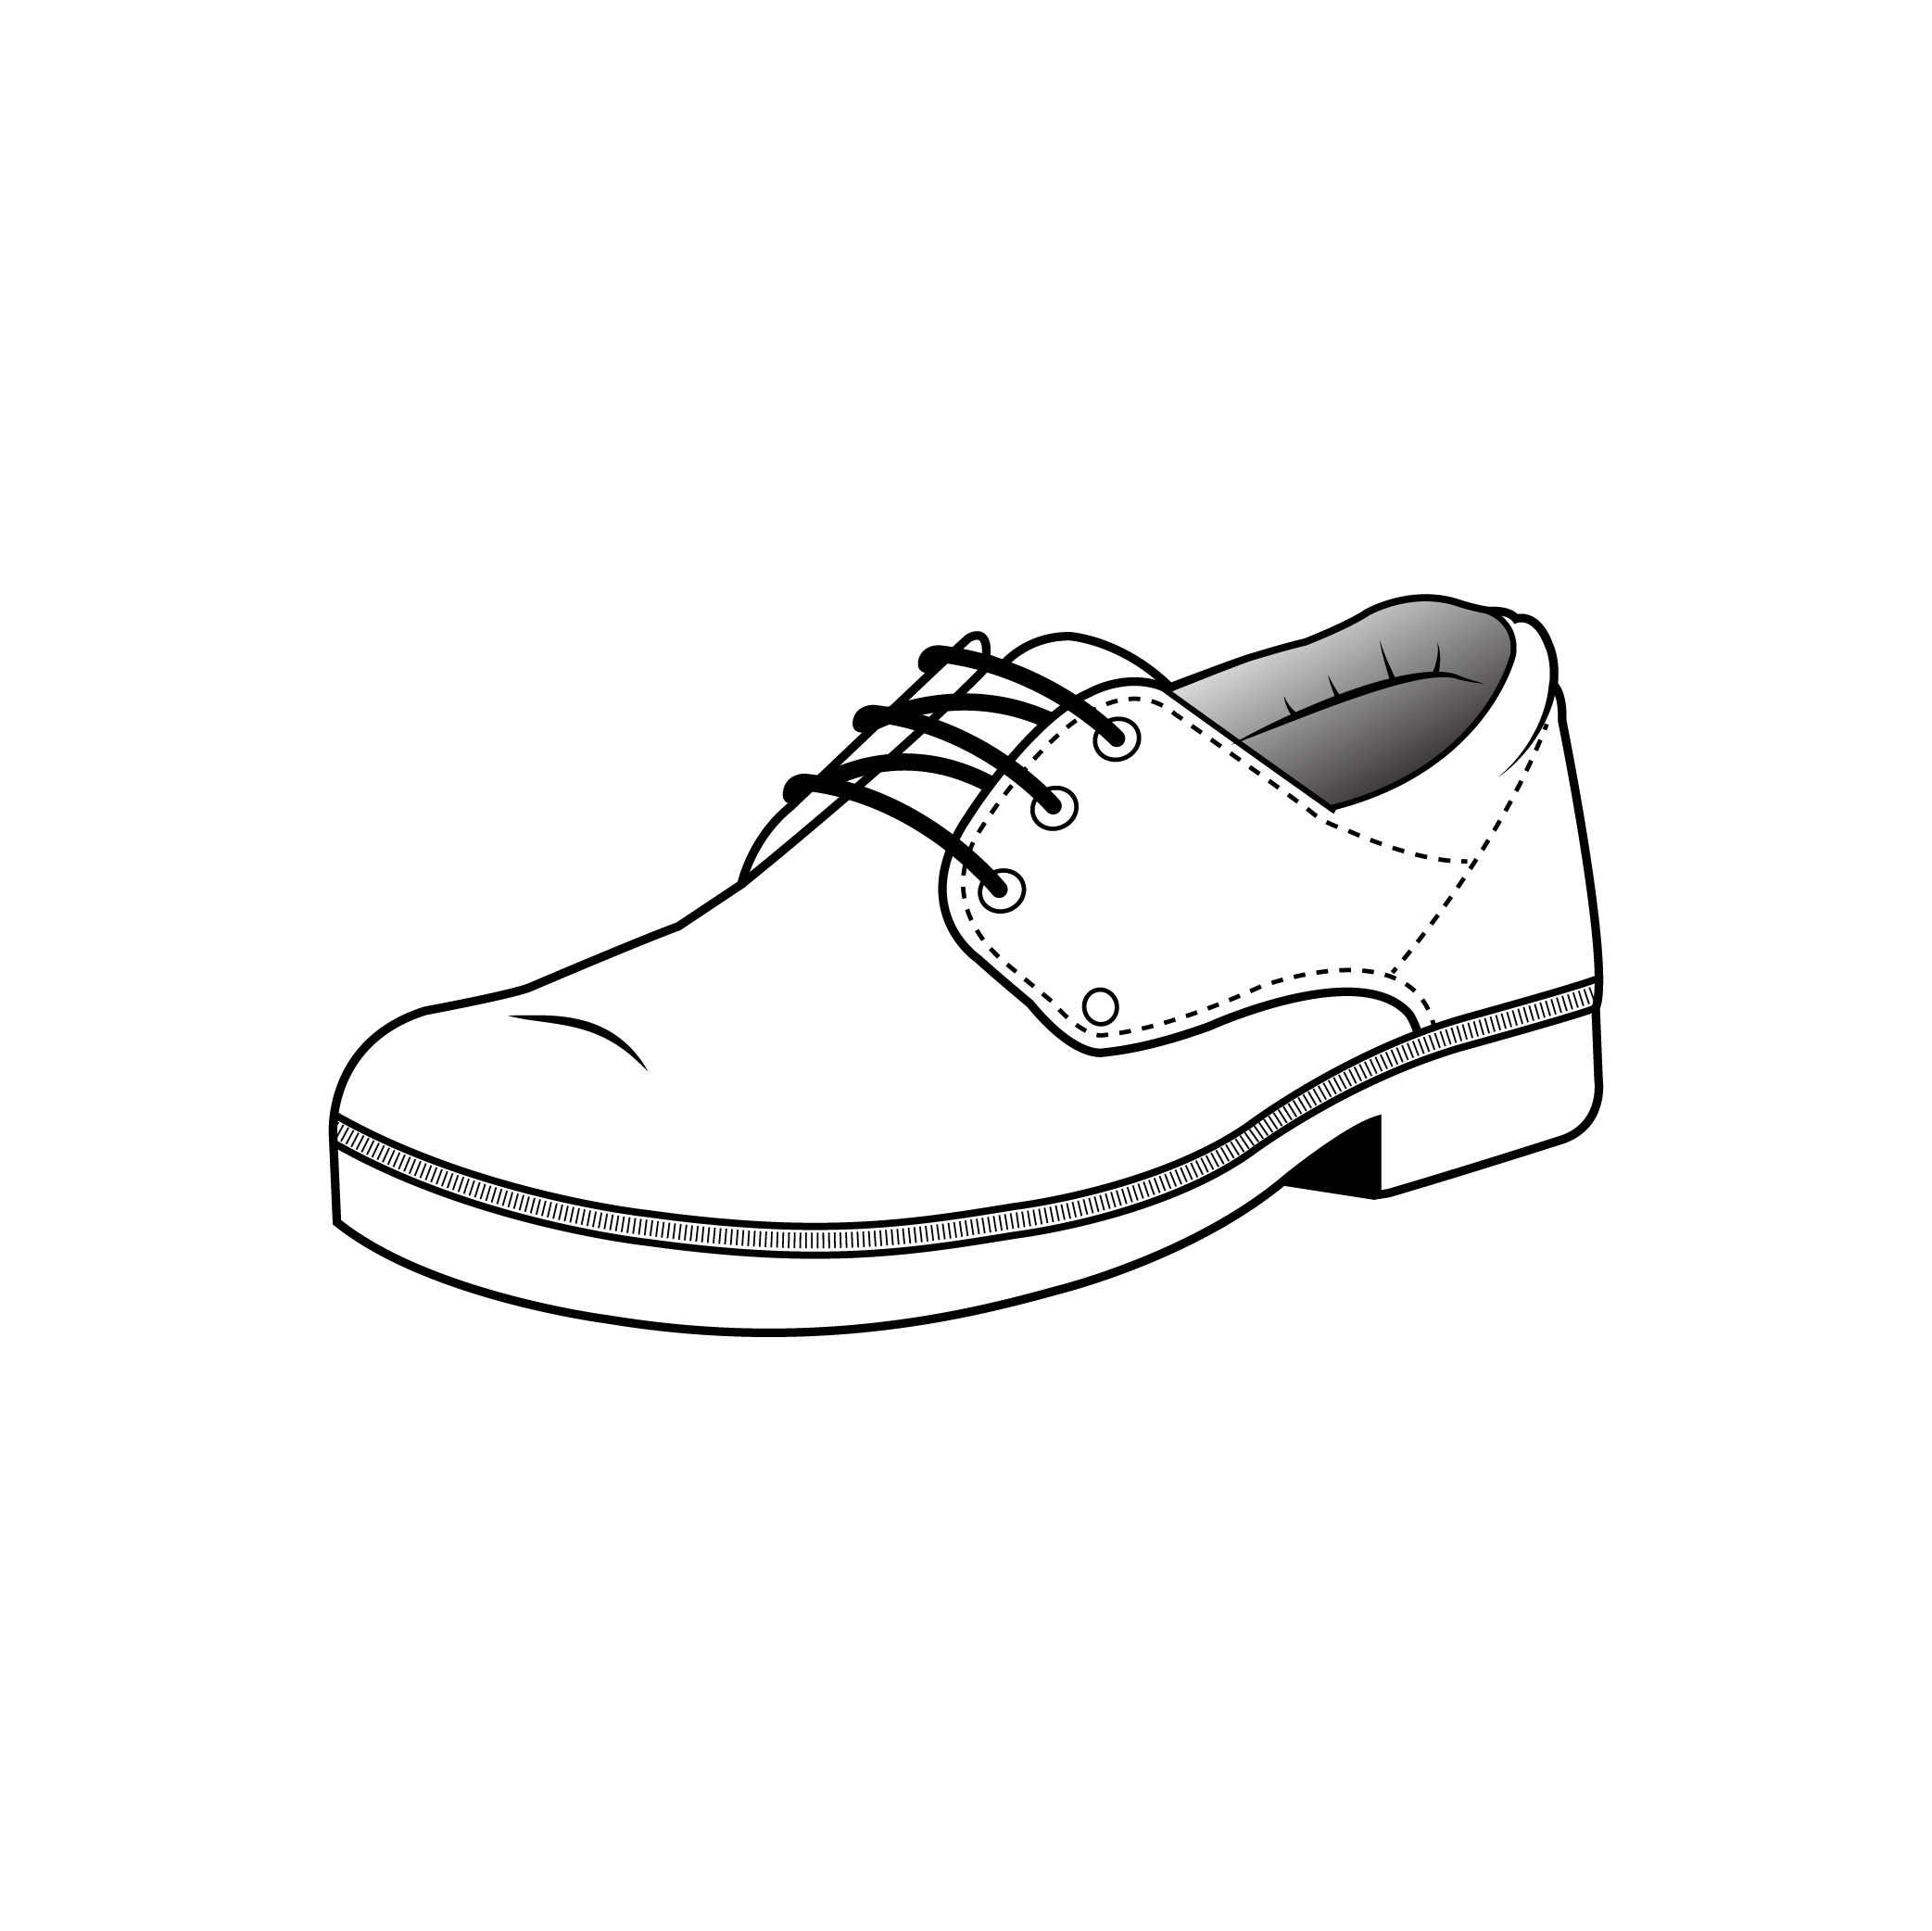 A vector drawing line illustration of a shoe for the Rivers brand